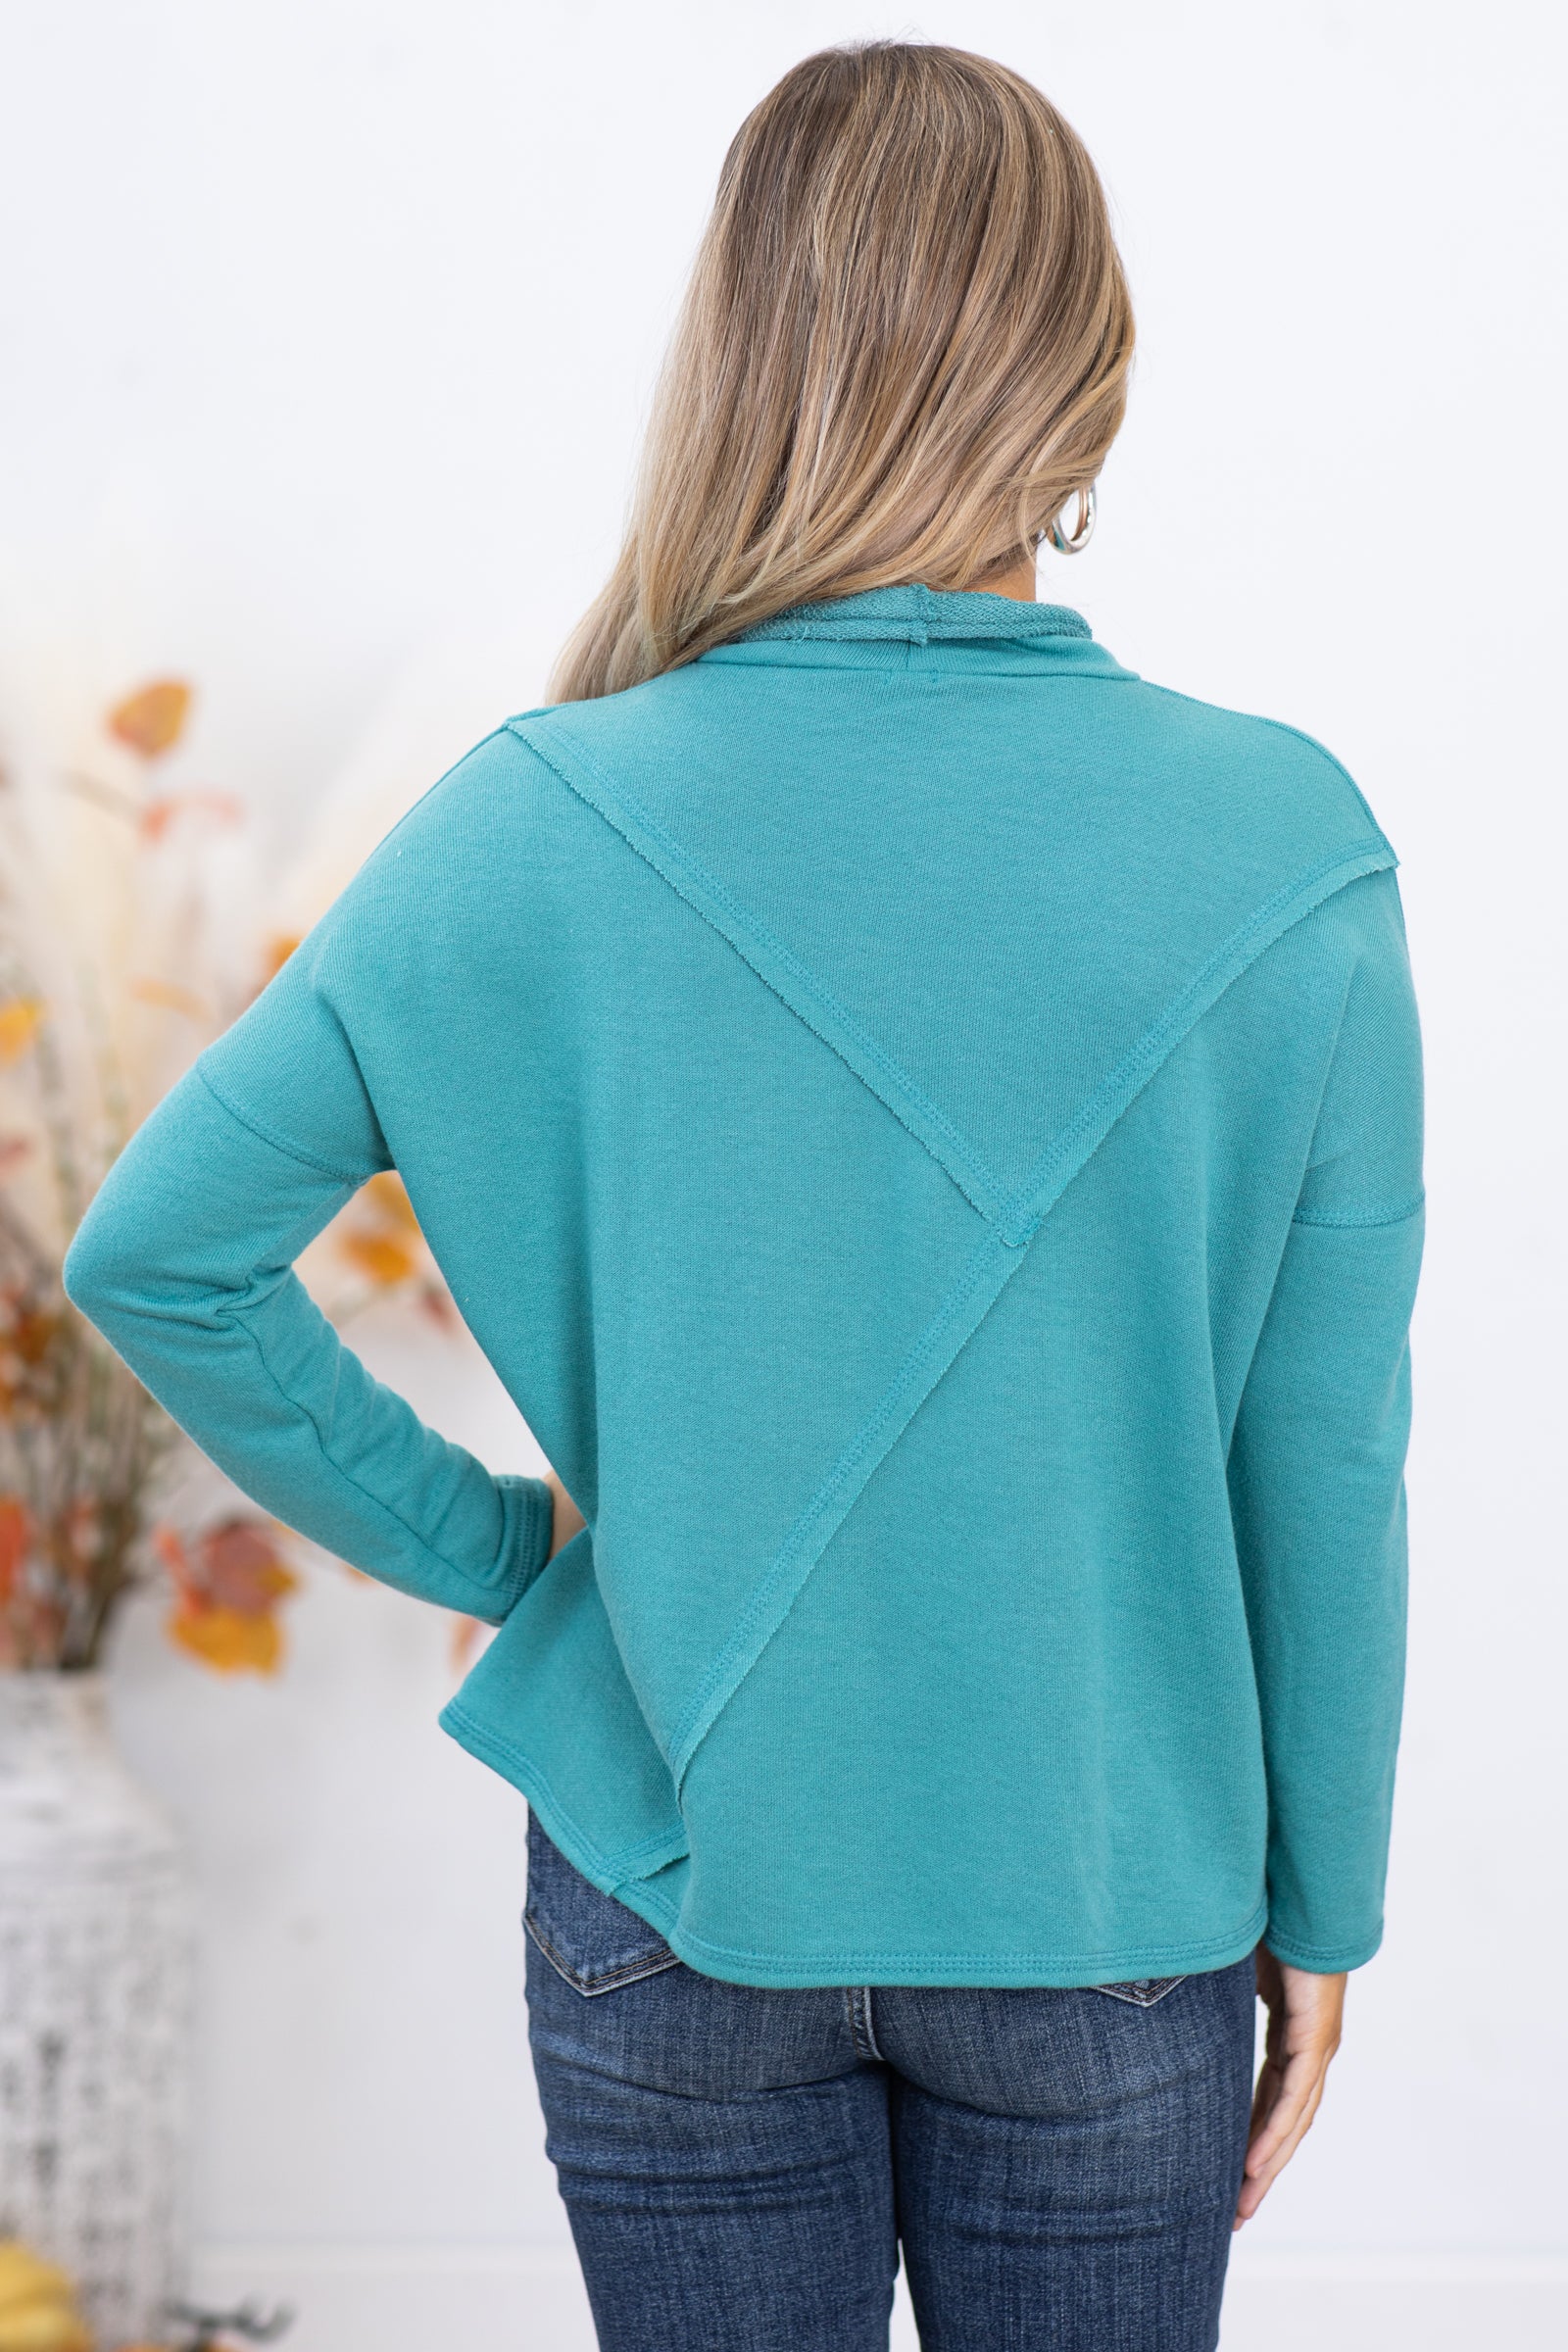 Turquoise Mock Neck Top With Seam Detail